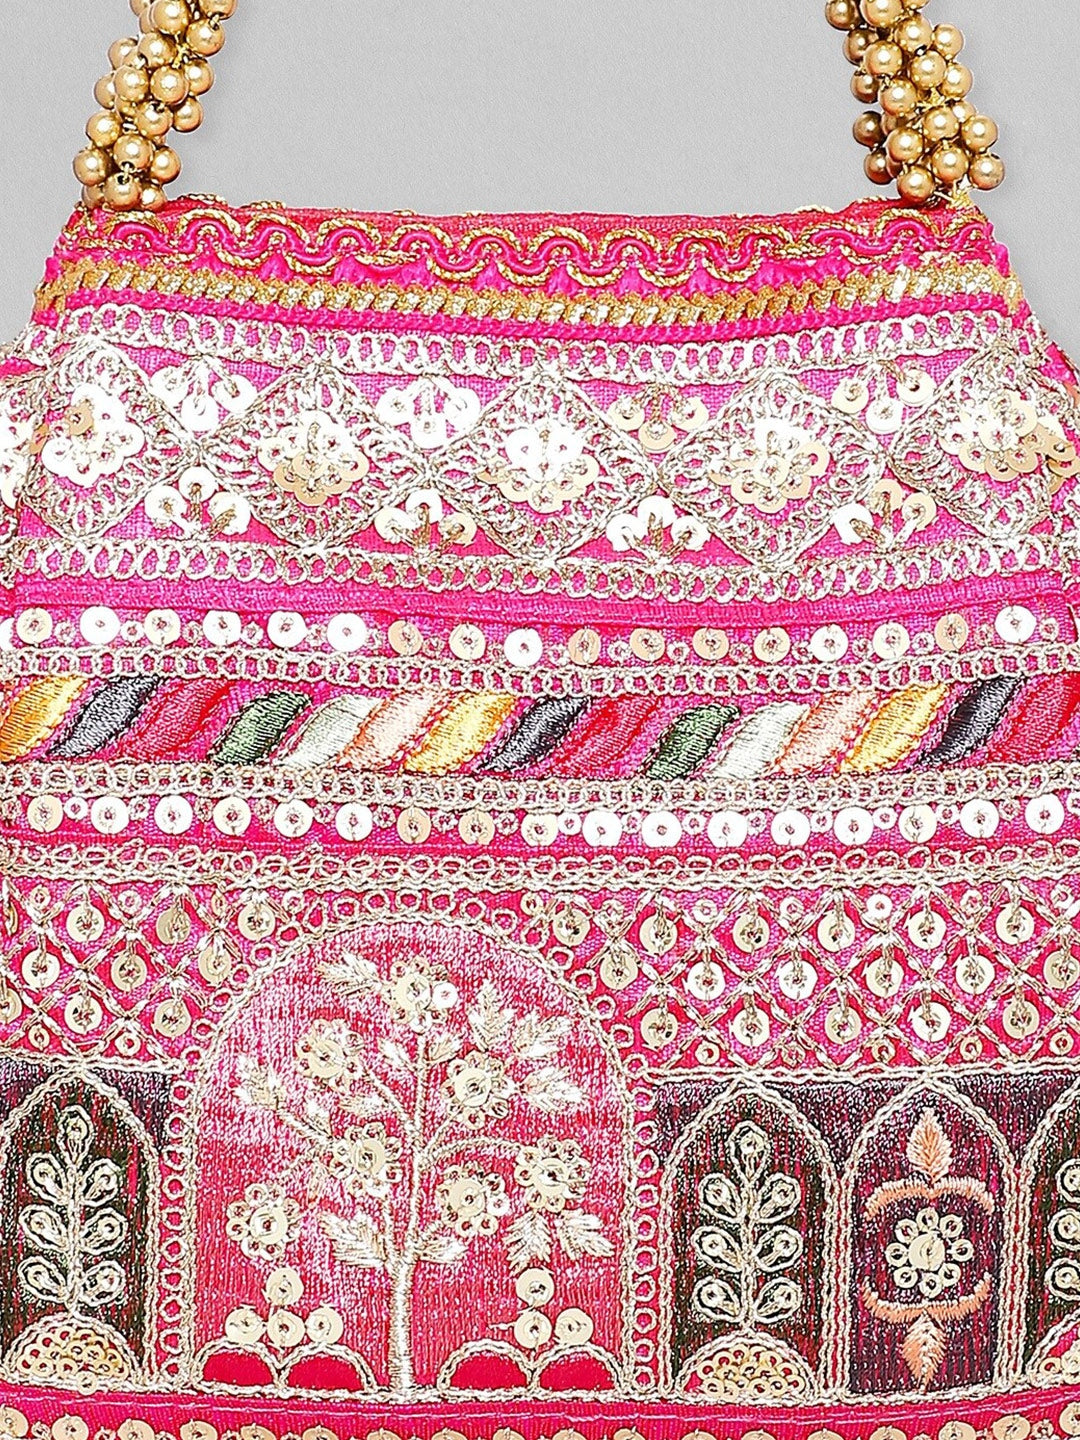 Embroidered Potli Clutch